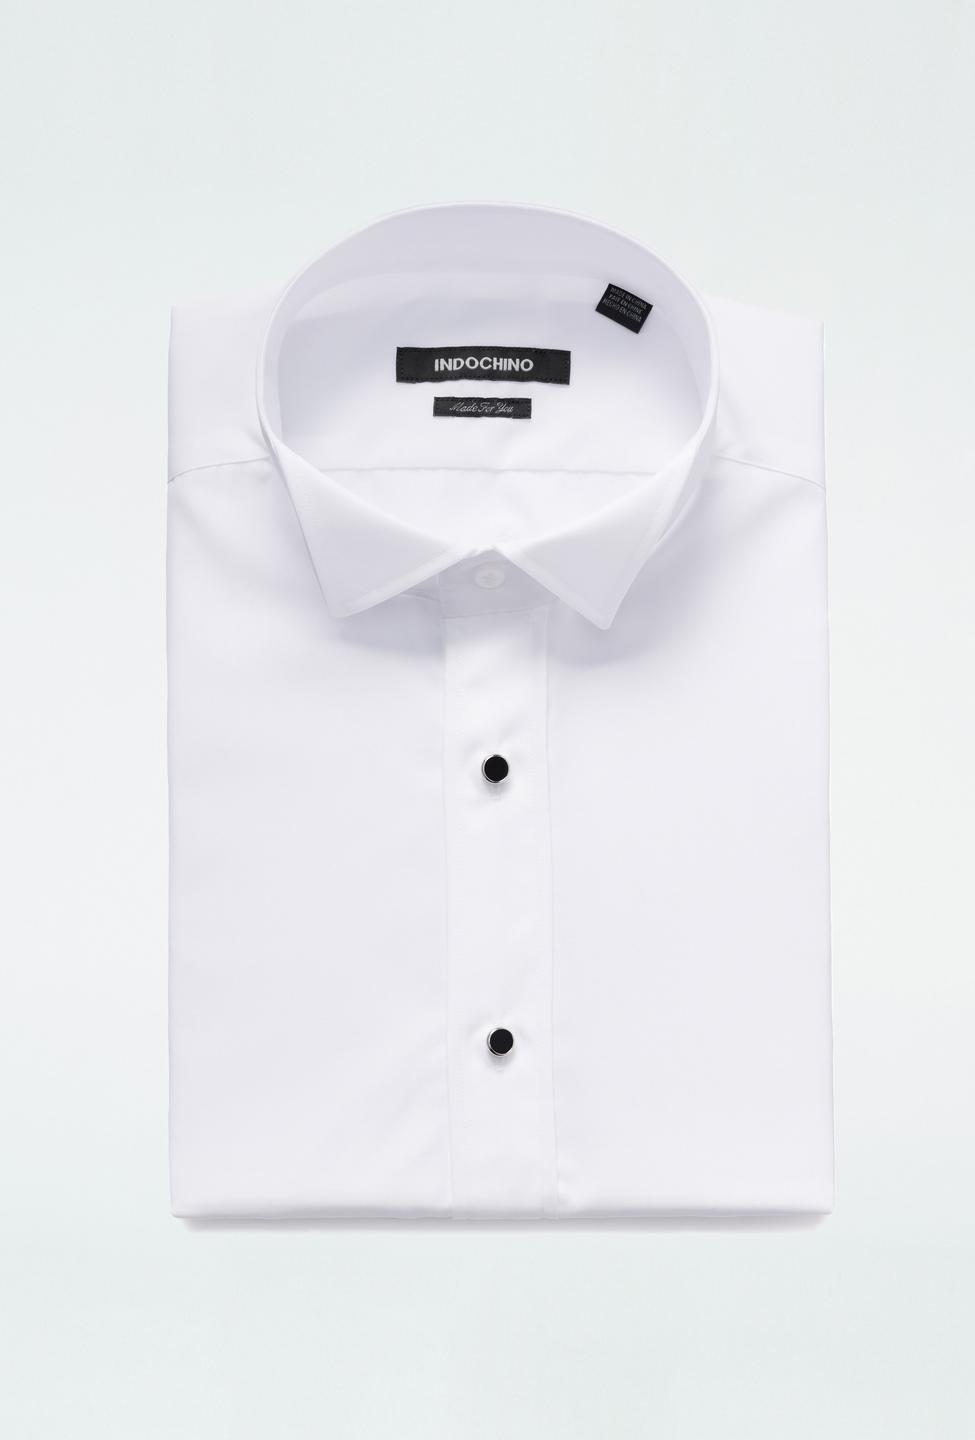 White shirt - Helston Solid Design from Premium Indochino Collection